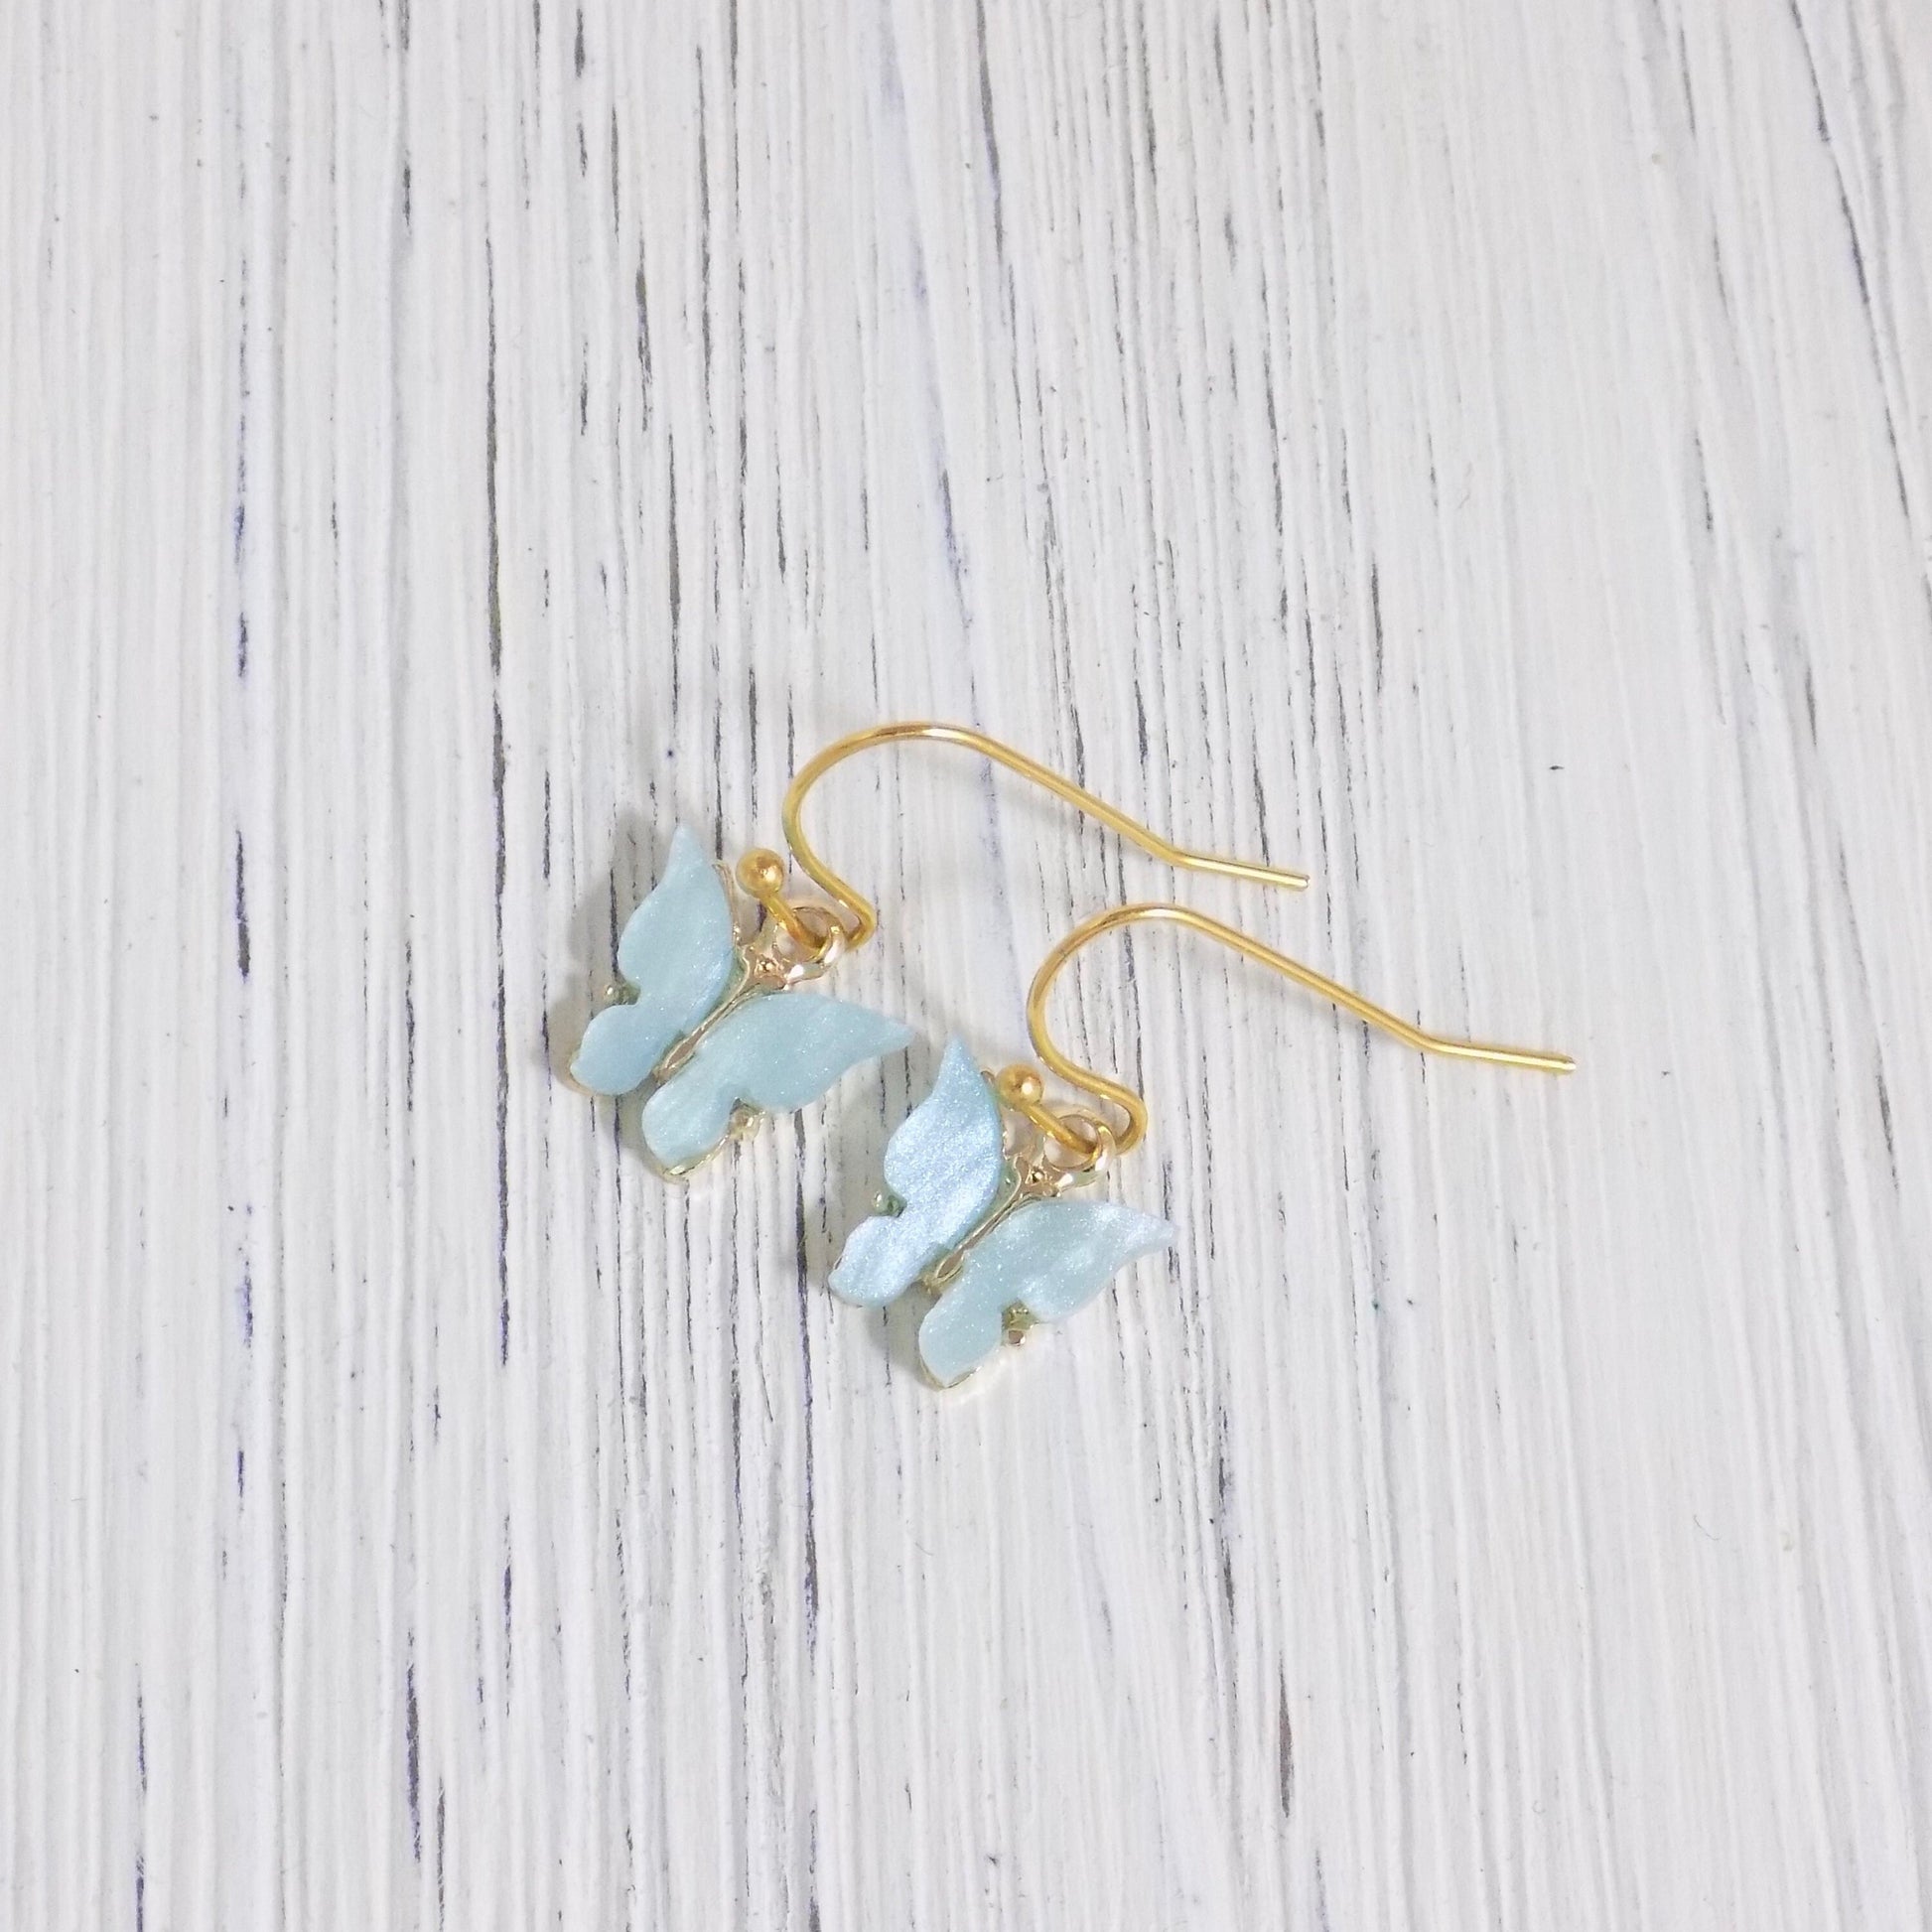 Small Butterfly Drop Earrings Blue and Gold Minimalist Dangle, L2-17